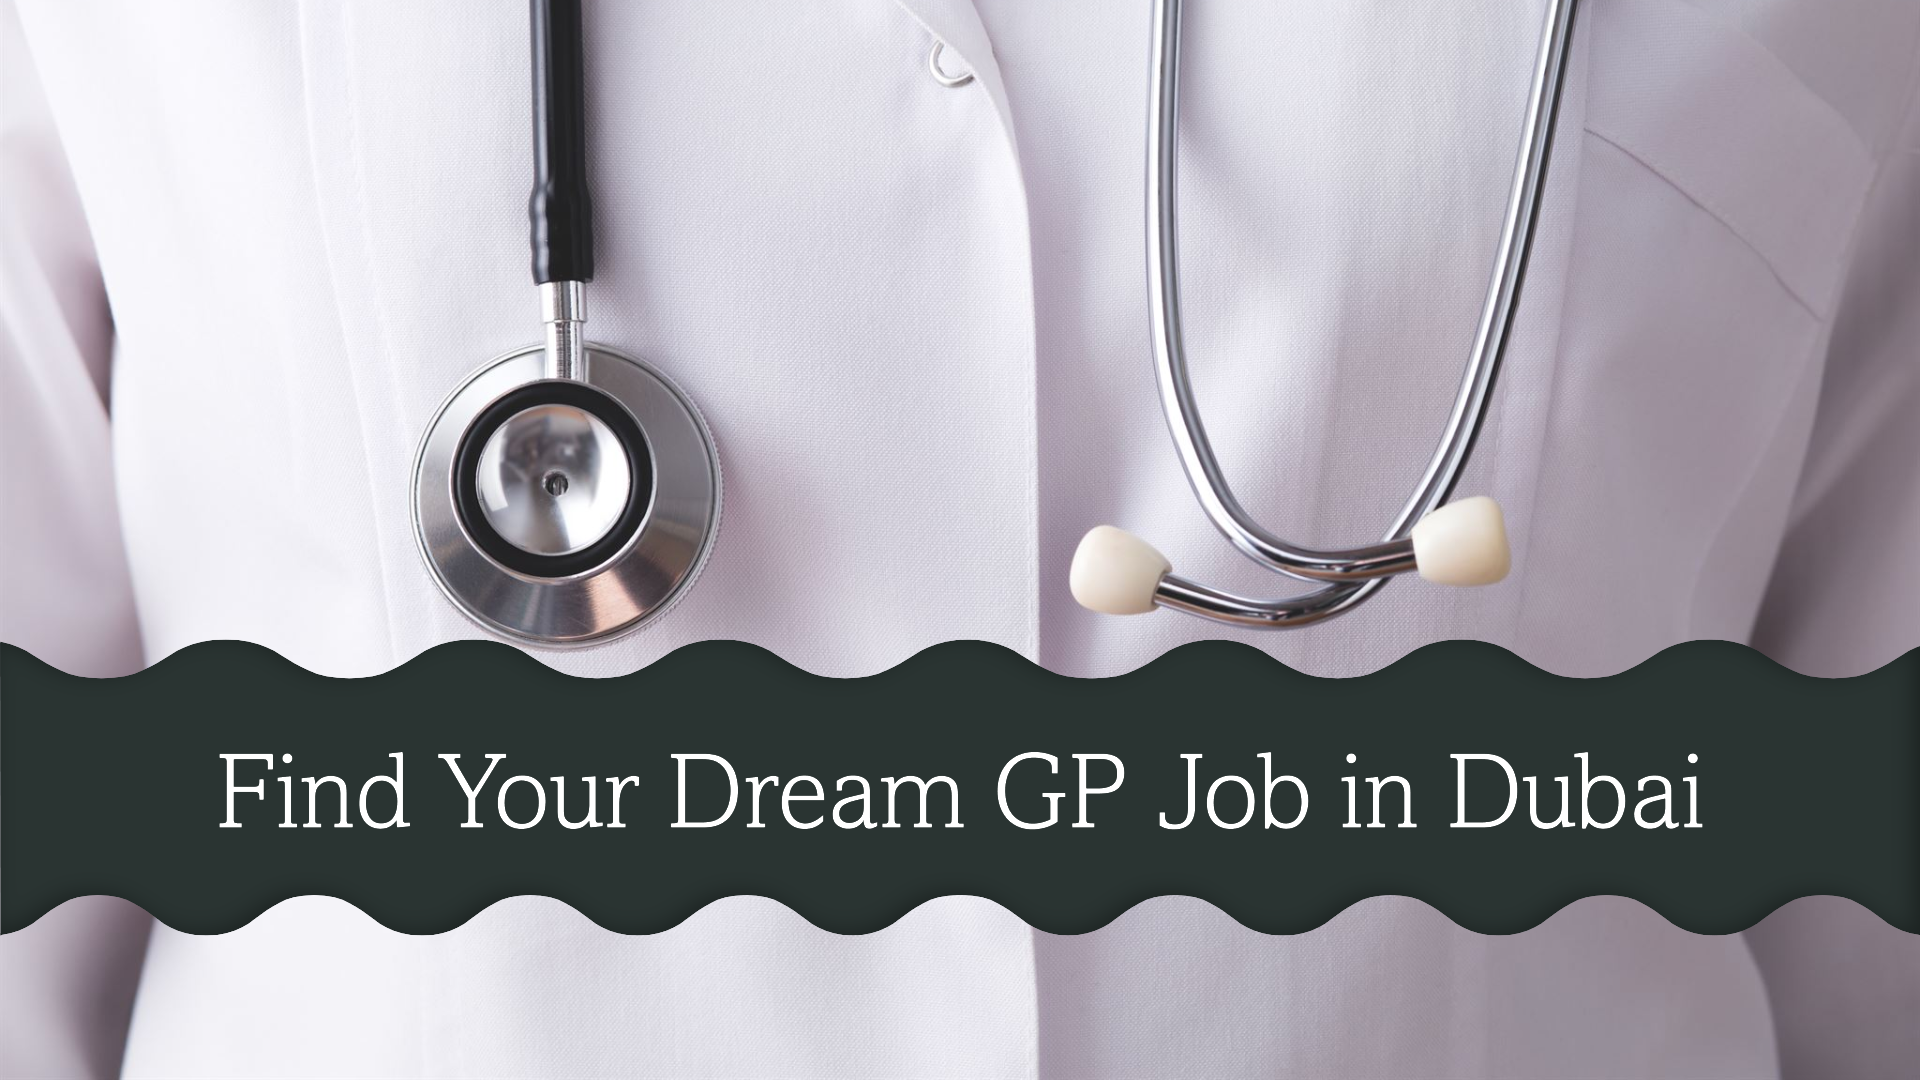 general practitioner jobs in dubai for all nationalities with salary 22,000 AED